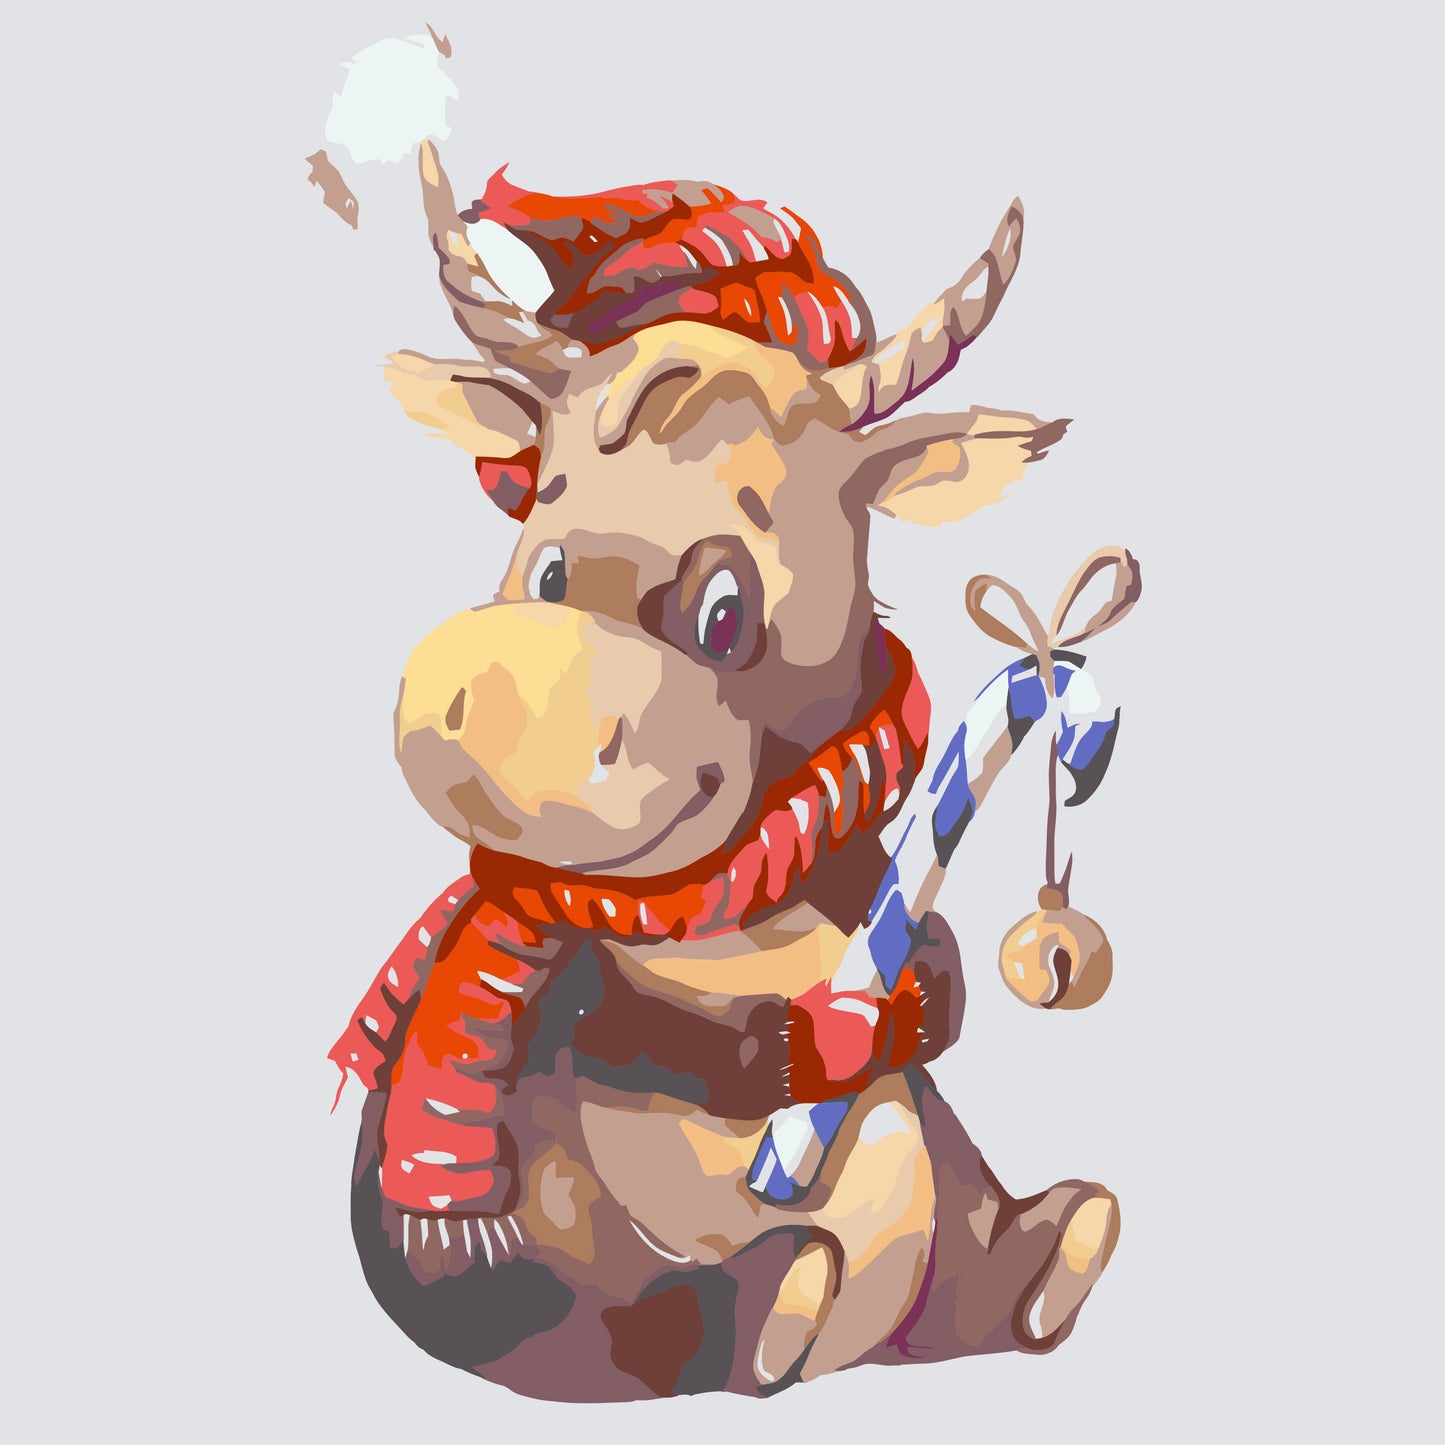 Smiling Baby Ox - Mini Paint by Numbers Kit